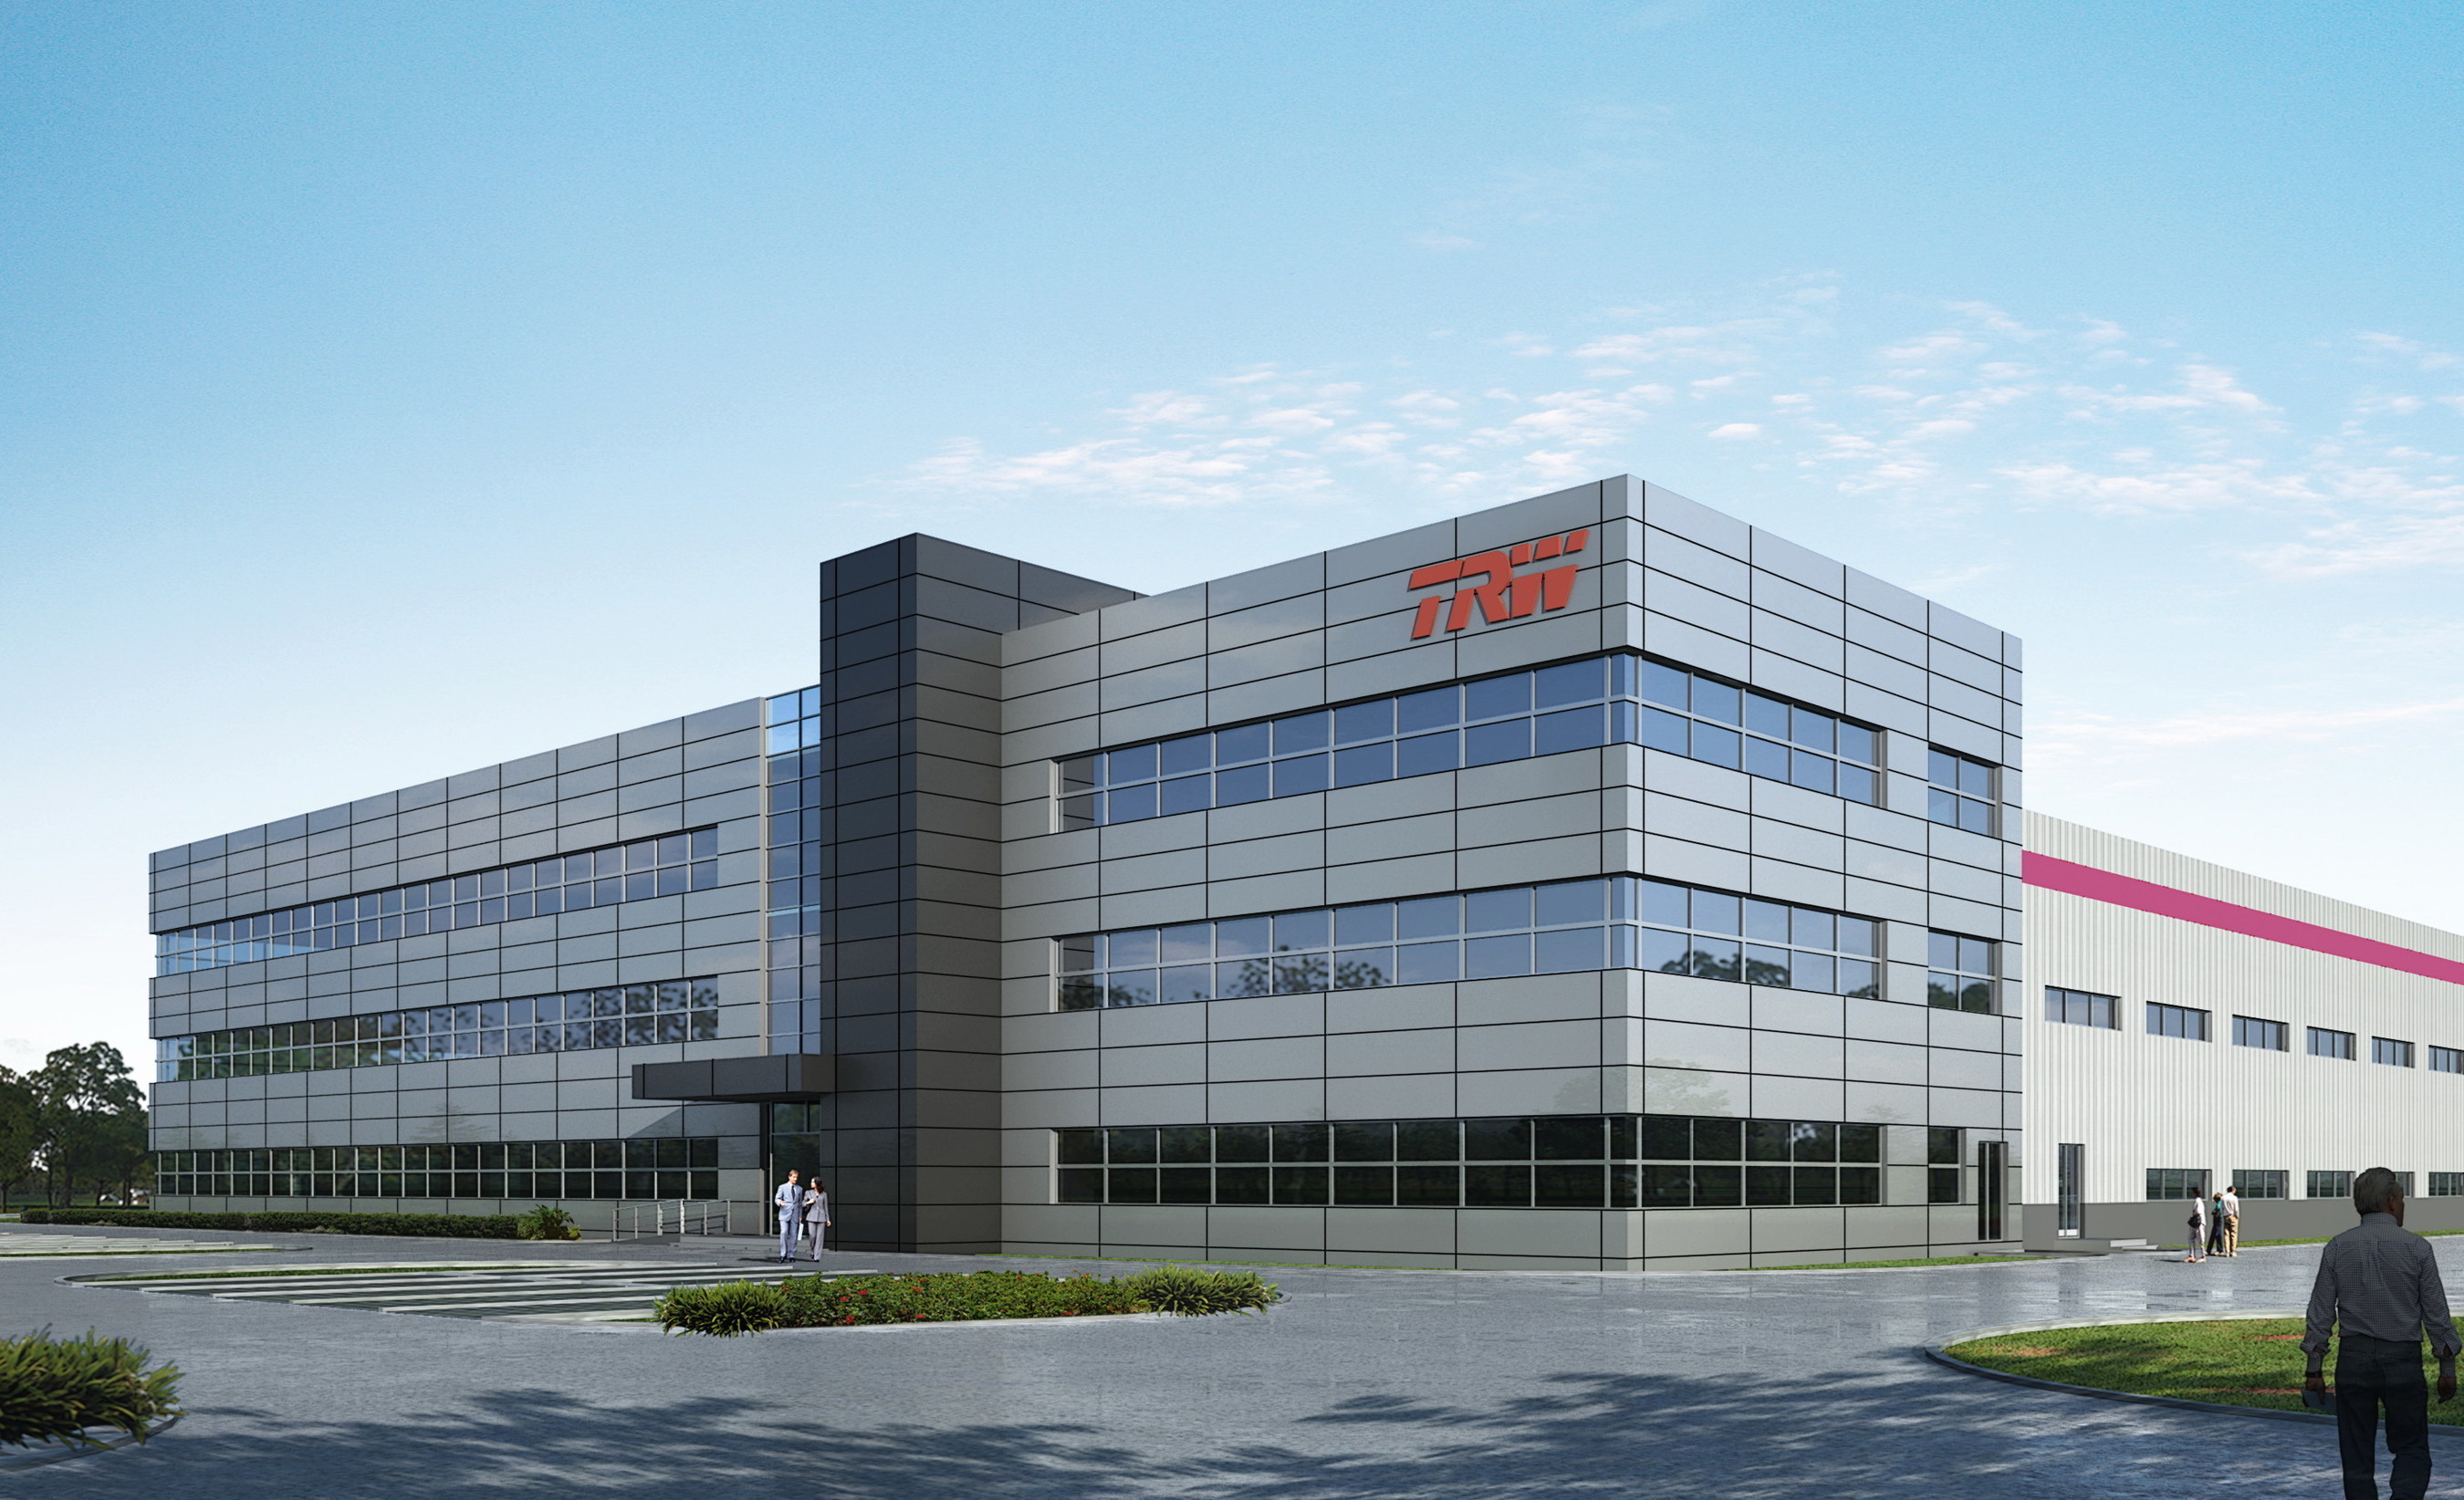 TRW has announced plans to open three new plants in China this year and next. Two of the facilities are located on the same campus in Zhanghjiagang in the province of Jiangsu, one dedicated to braking which is due to start operations at the end of Q2, 2015, and the other to occupant safety systems (OSS) with a planned start of production in November this year. The third is located in Xian and is also an OSS plant - anticipated to be operational by the third quarter of 2016.